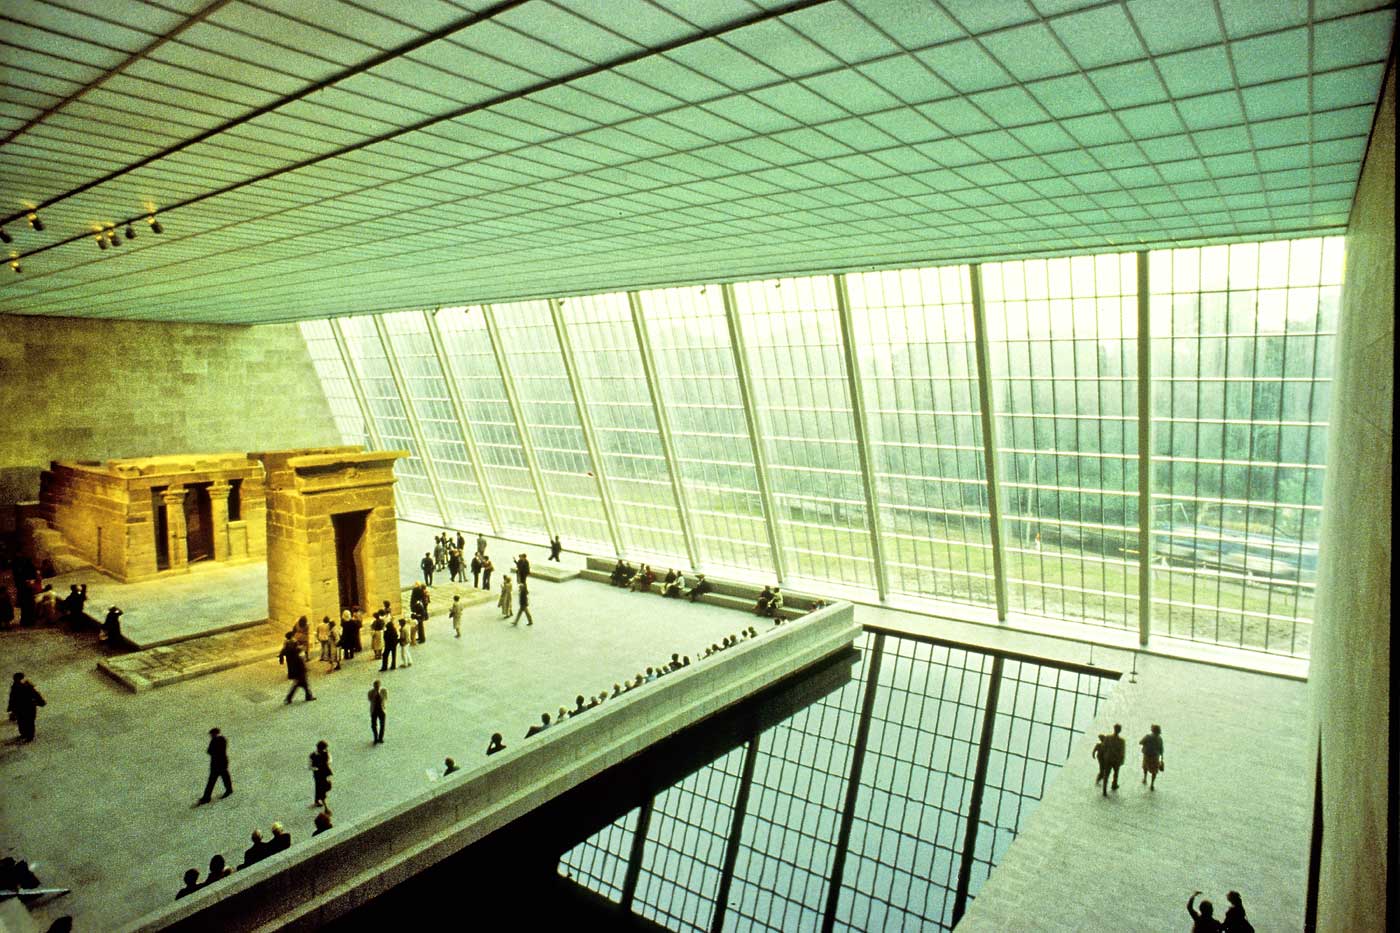 Temple of Dendur in the Sackler Wing of the Metropolitan Museum of Art, New York, New York, 1979. Courtesy Kevin Roche John Dinkeloo and Associates.